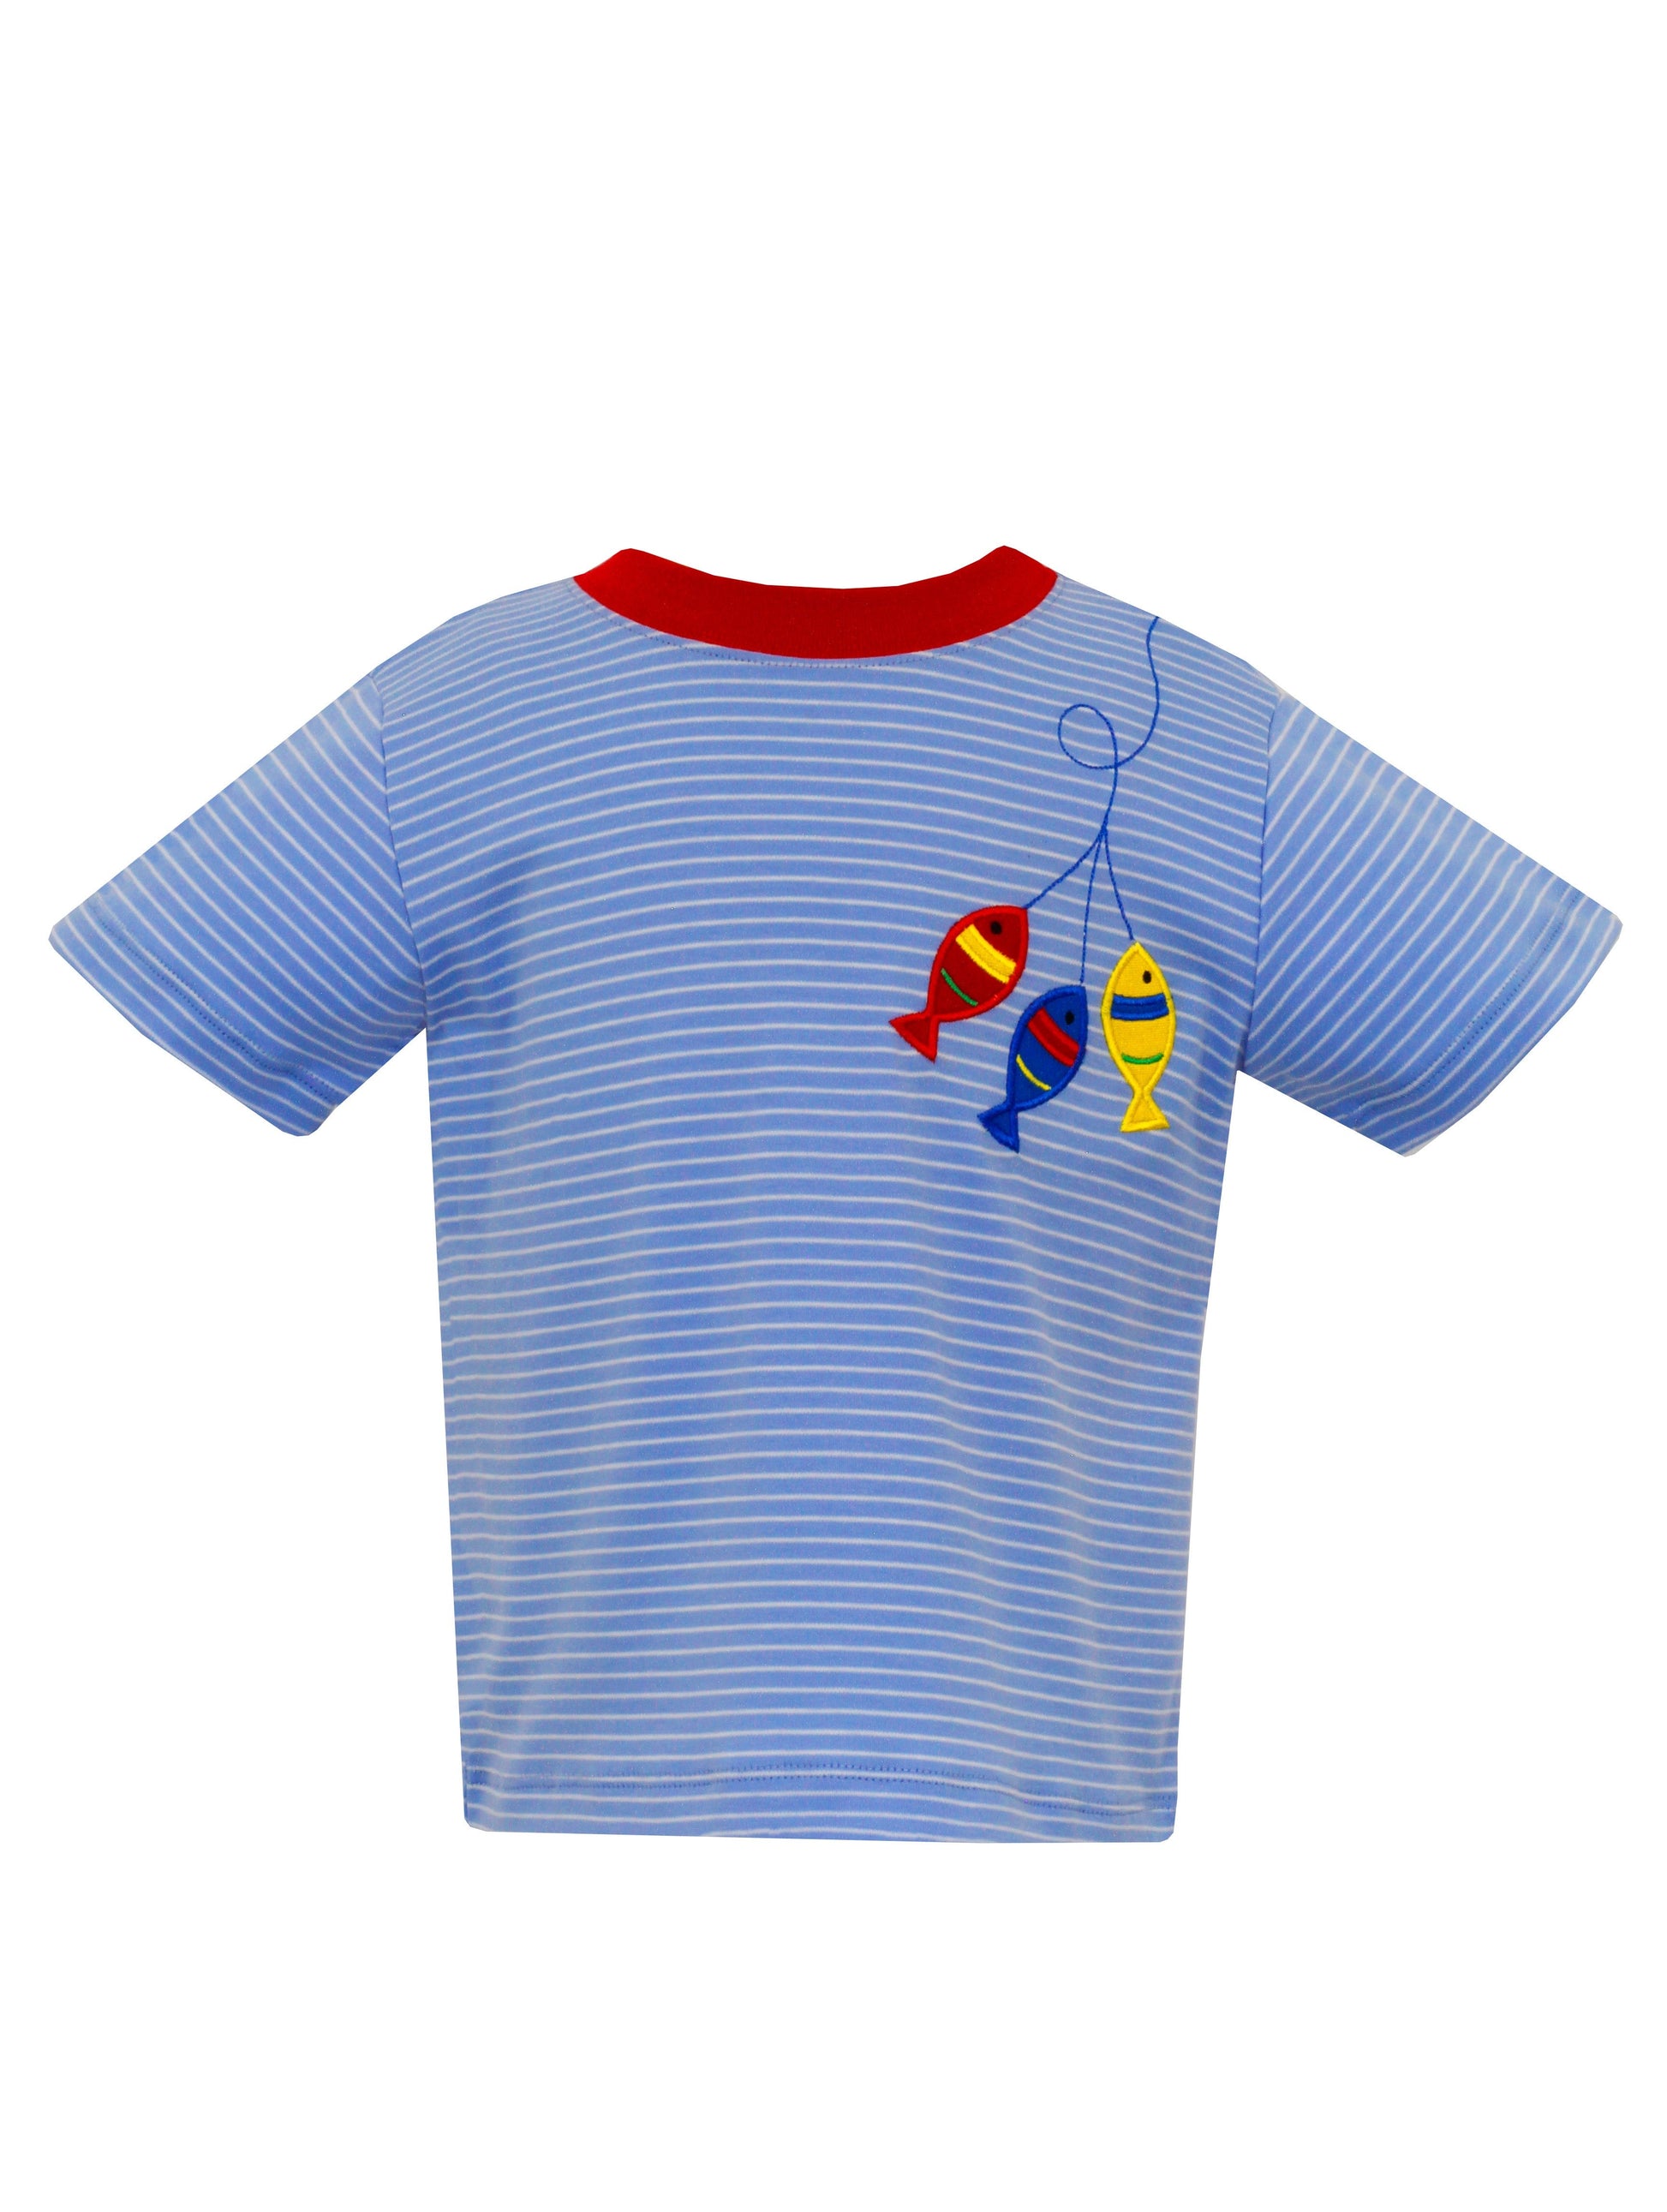 Claire & Charlie Boys Periwinkle Stripe / 2 Toddler Claire & Charlie Periwinkle Stripe Boys Fish Applique T-Shirt